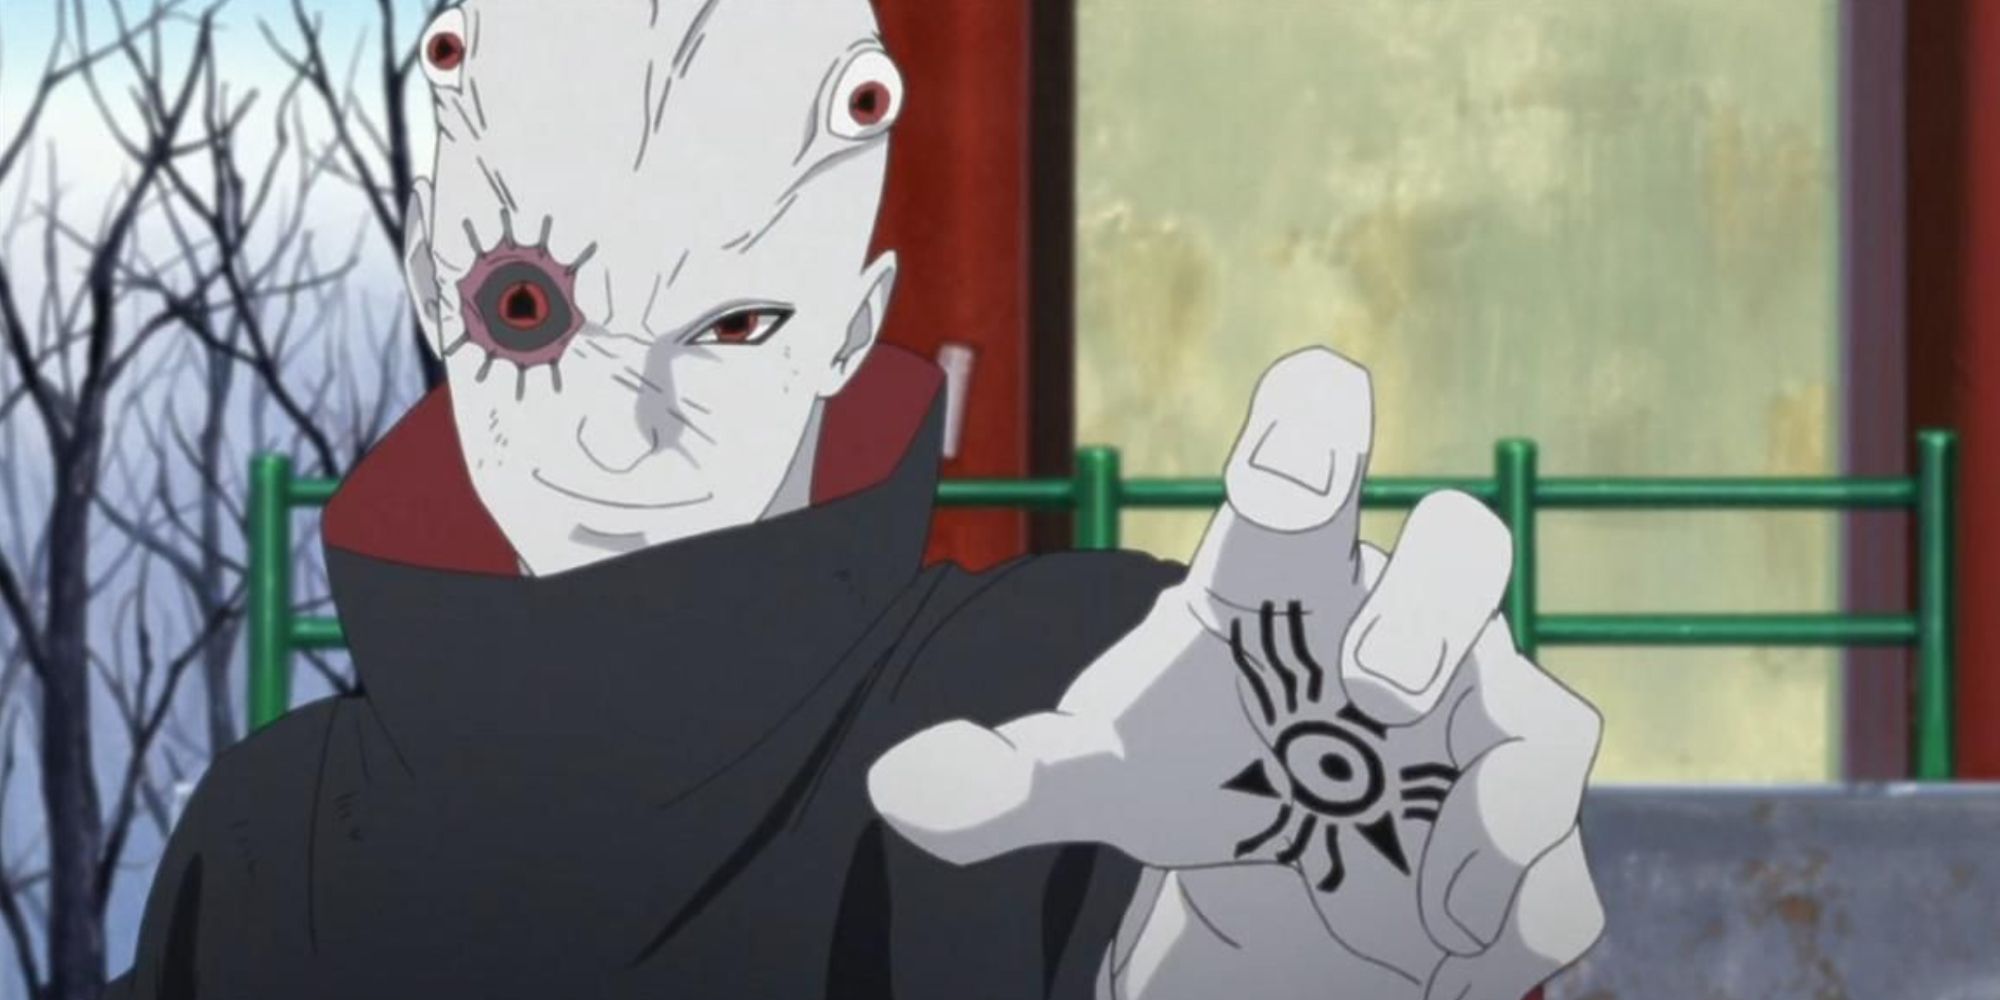 Shin Uchiha, a rogue experiment created by Orochimaru,during the events of Boruto